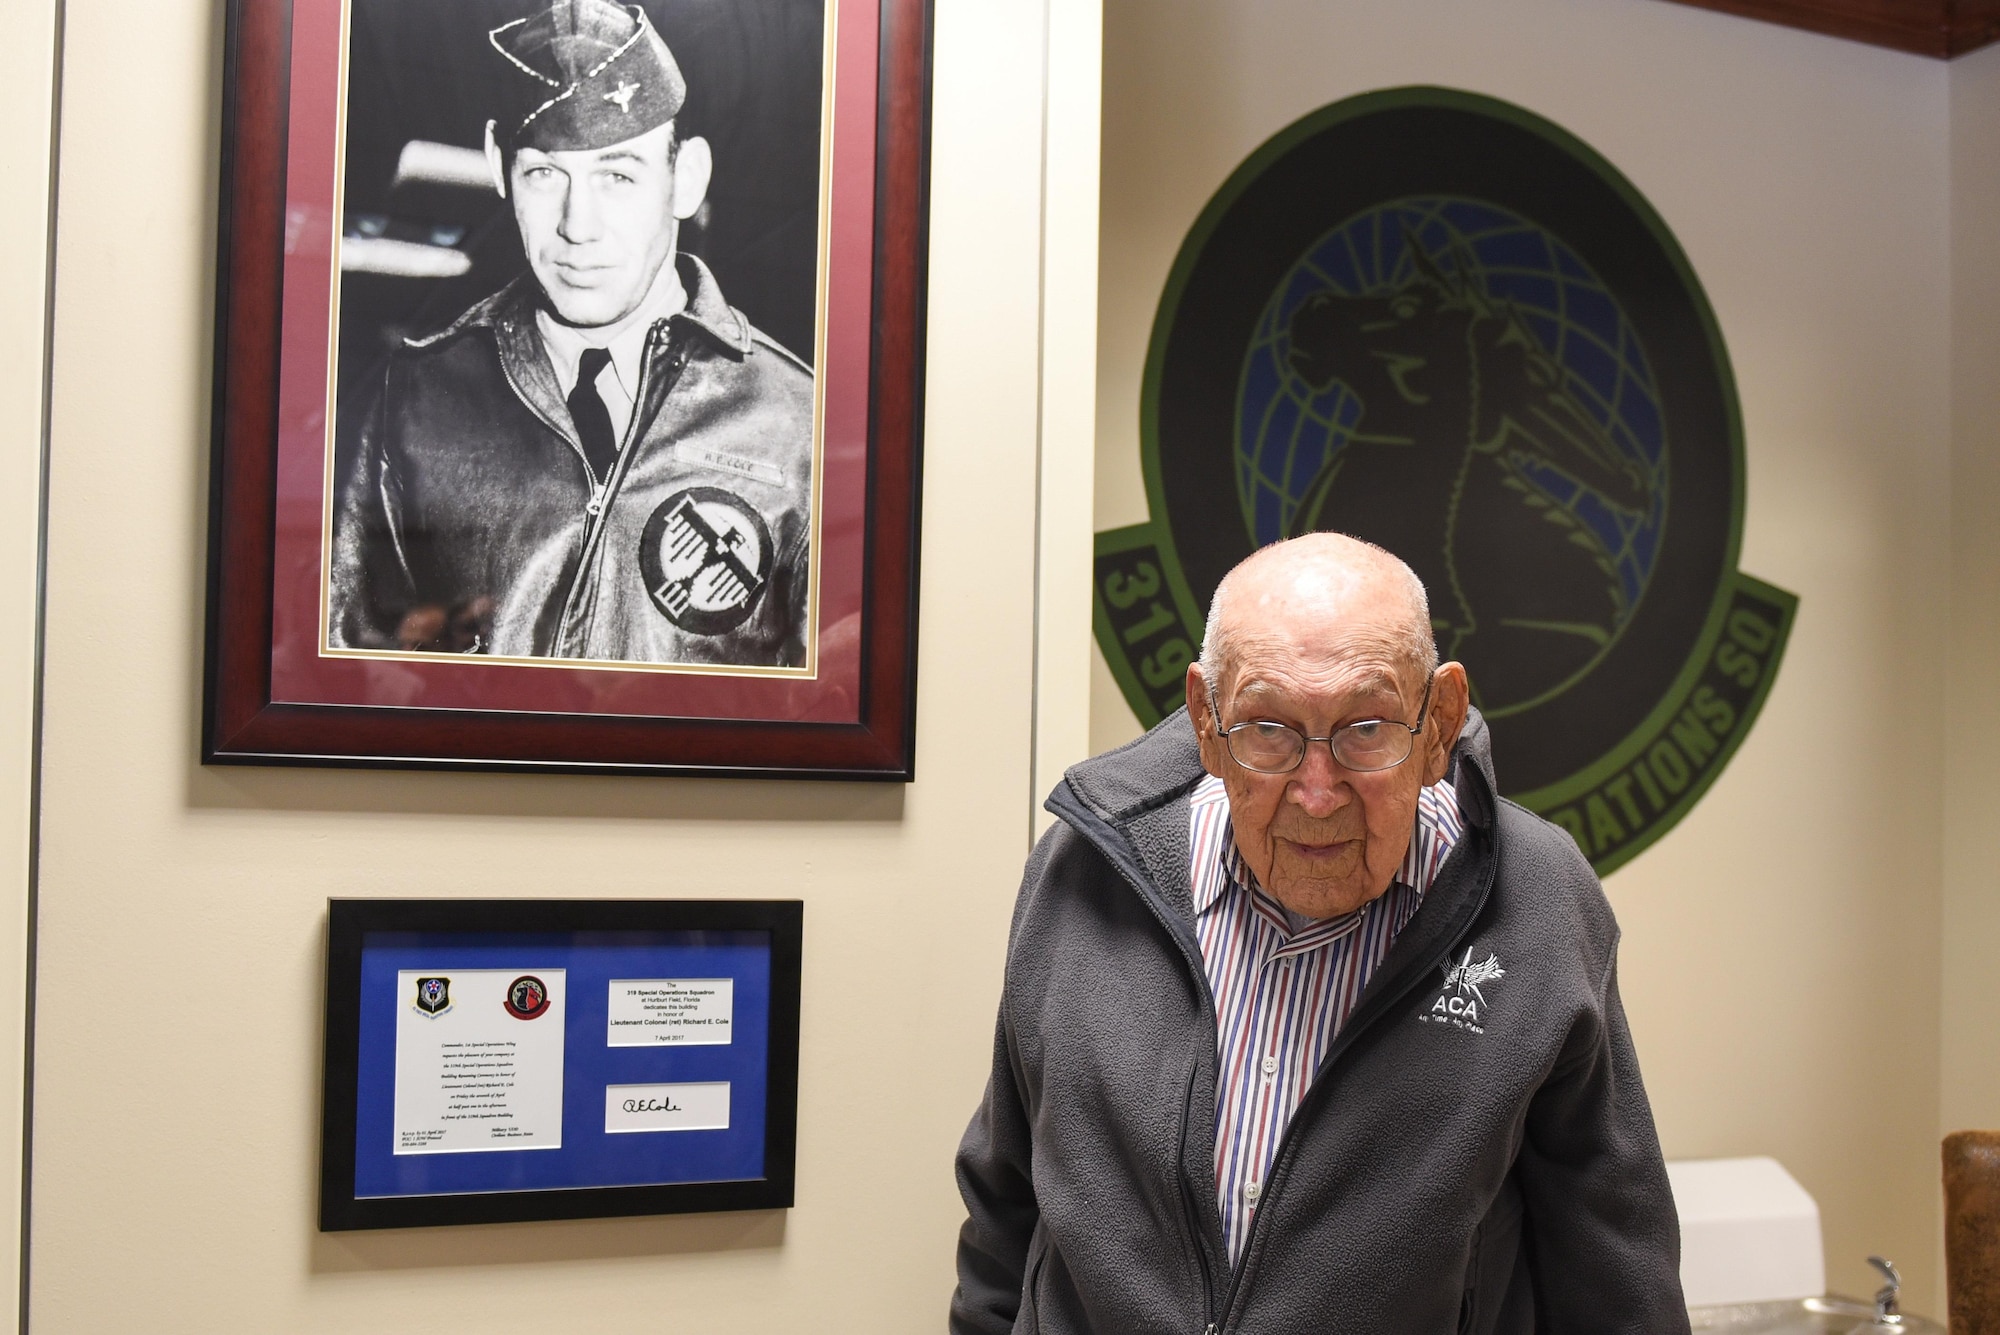 Retired Lt. Col. Richard E. Cole stands with a portrait of himself from his time in the Army Air Corps during World War II at the 319th Special Operations Squadron, Hurlburt Field Fla., April 7, 2017. In early 1942, Cole volunteered for Special Mission Number 1, which trained at Eglin Air Field, and on April 18, 1942, he served as then-Lt. Col. James H. Doolittle’s co-pilot during the Raid on Tokyo. (U.S. Air Force photo by Senior Airman Jeff Parkinson)